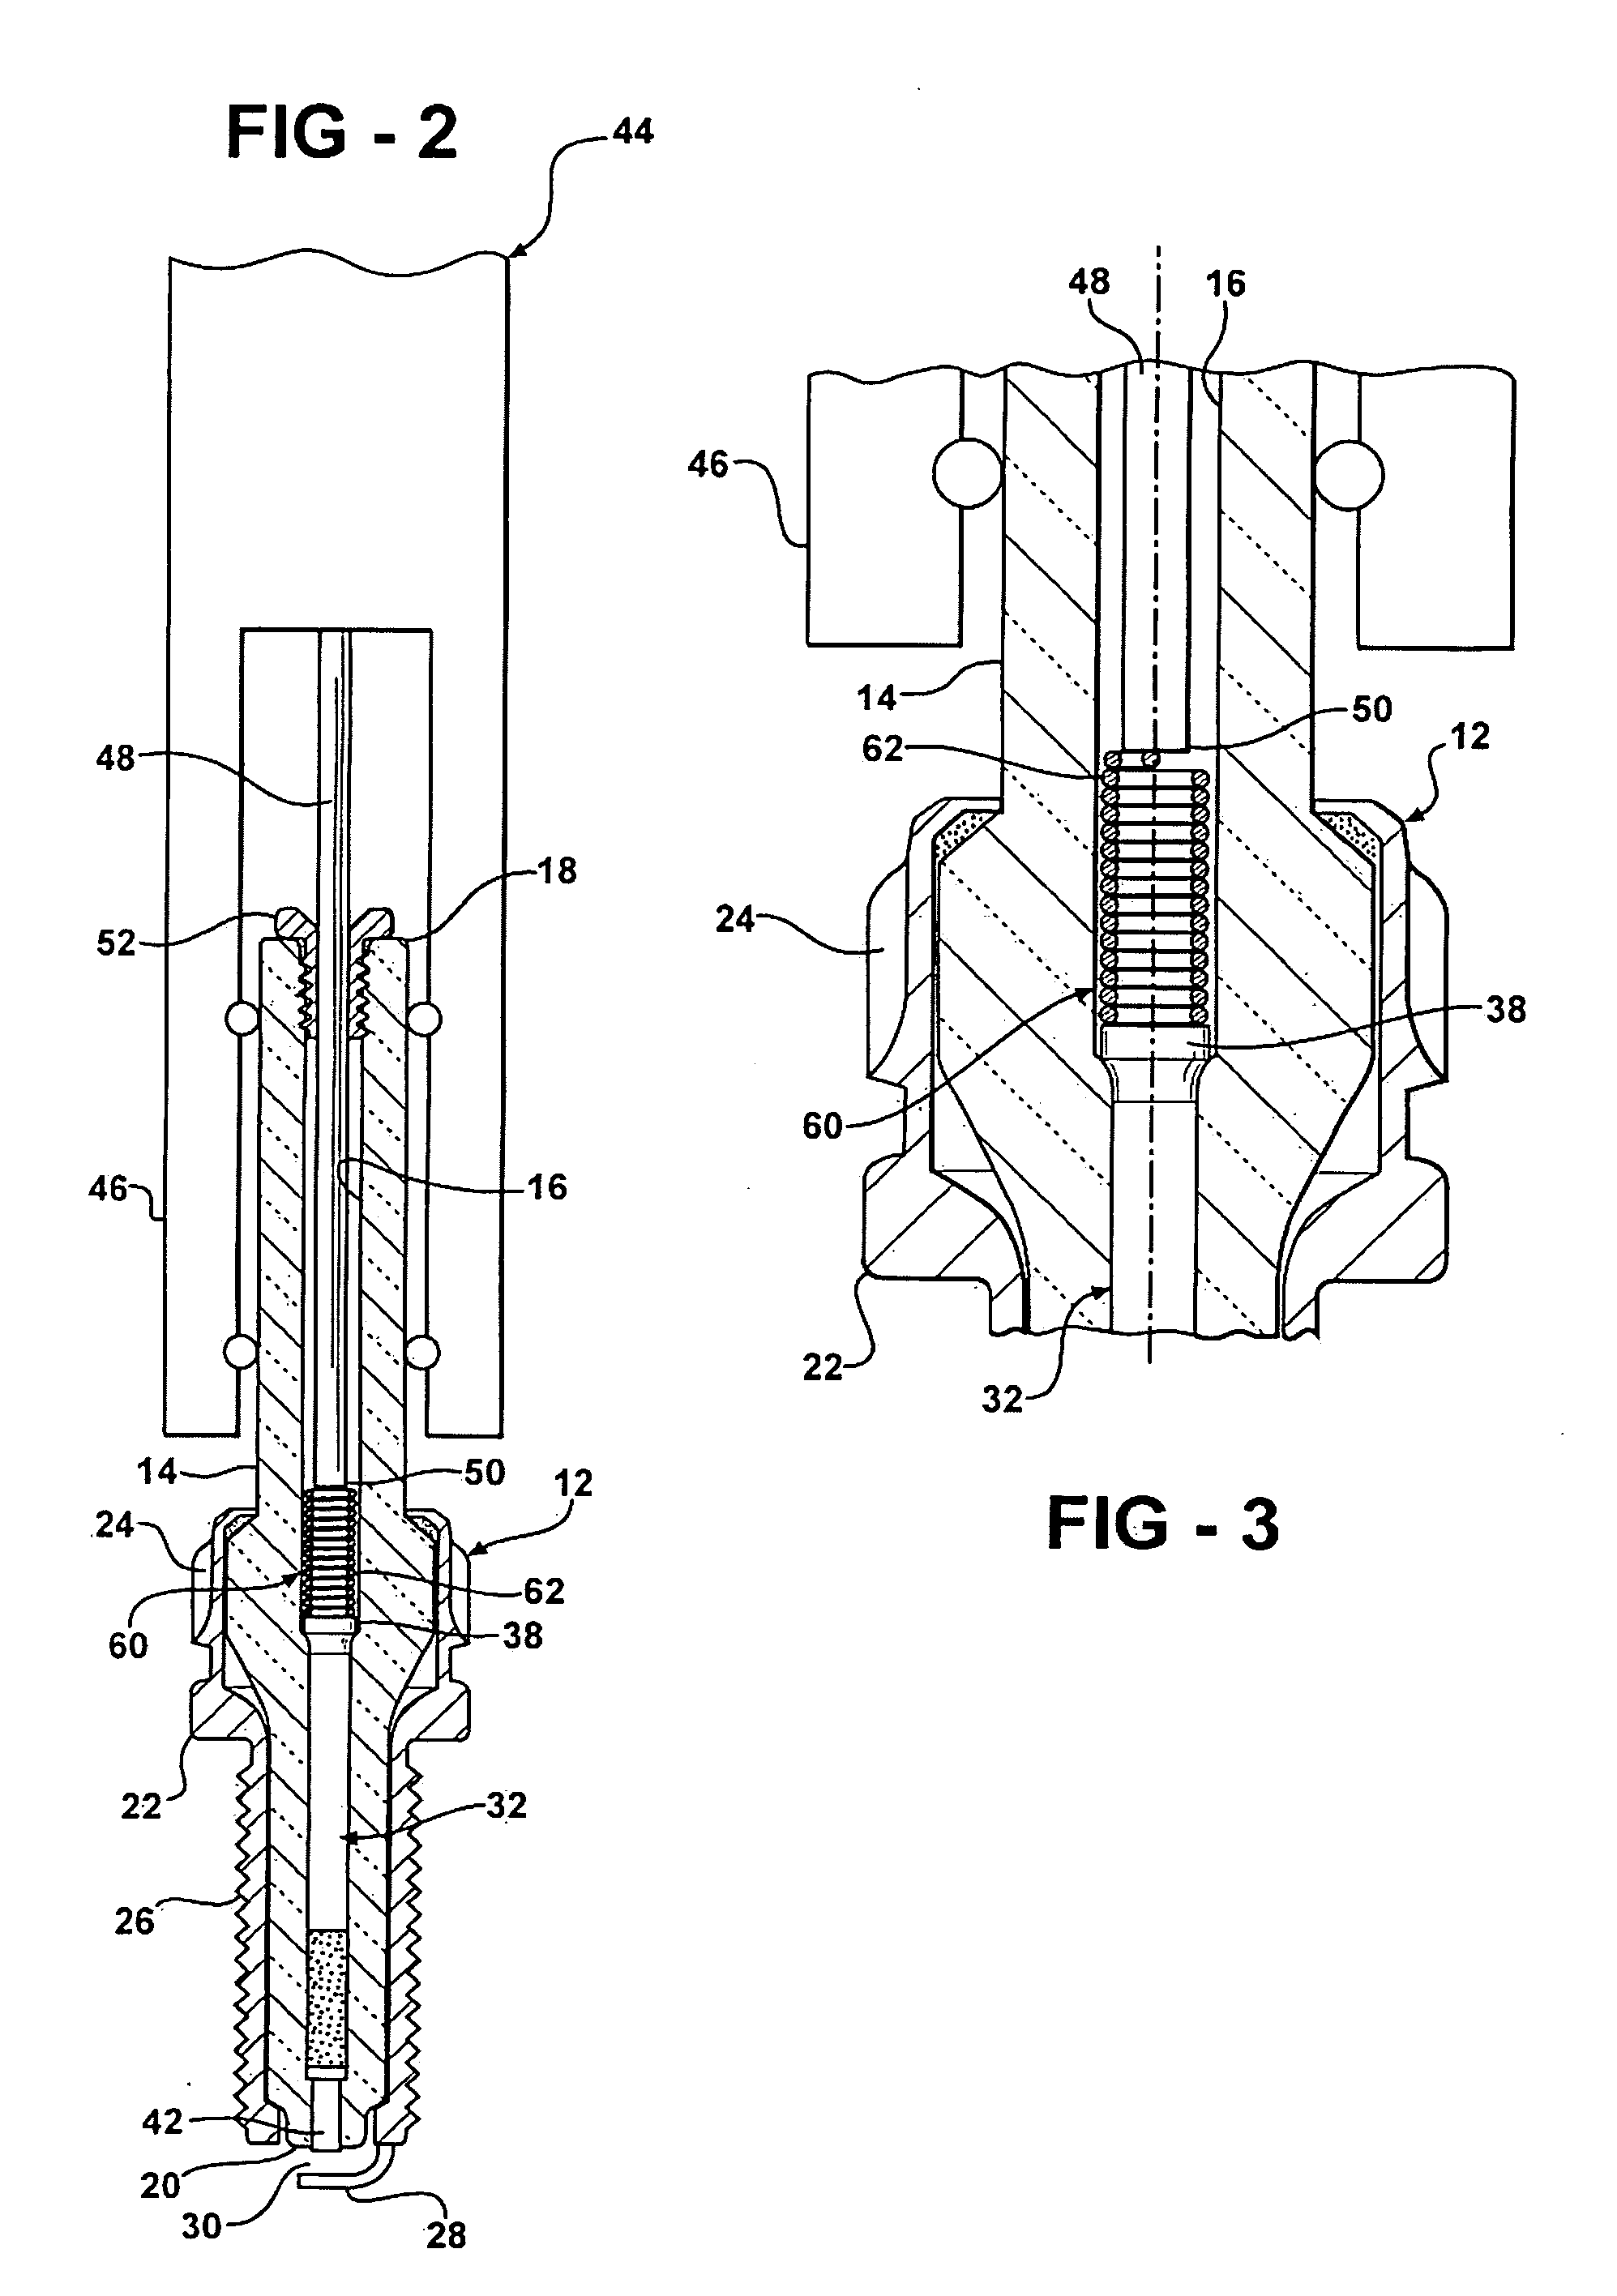 Spark ignition system with diagnostic capabilities